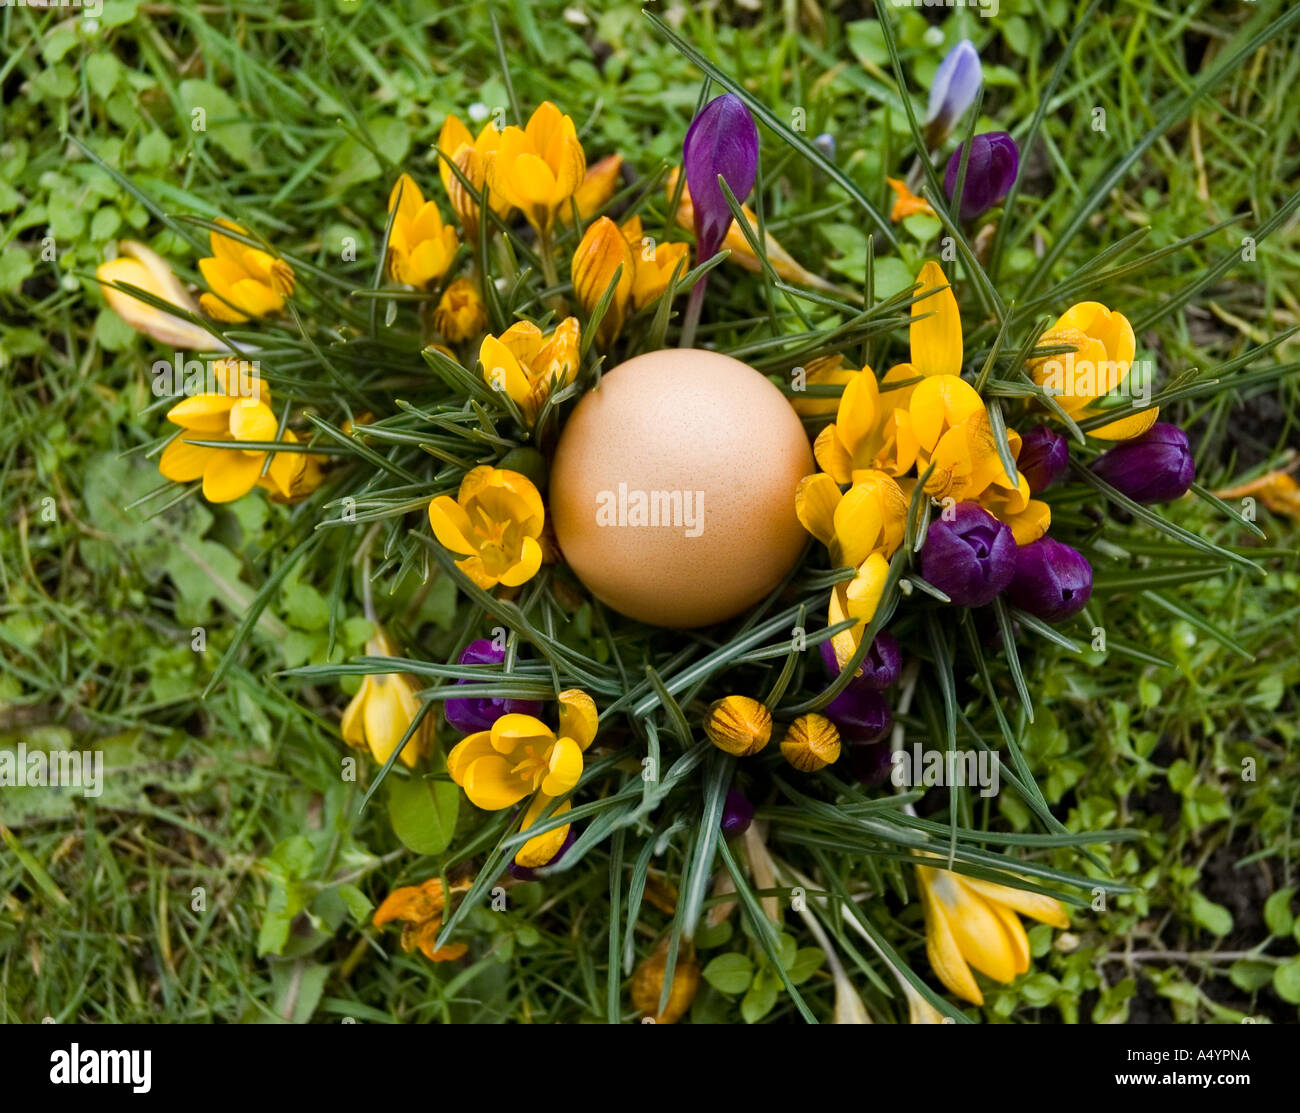 Egg in a nest of purple and yellow crocuses Stock Photo